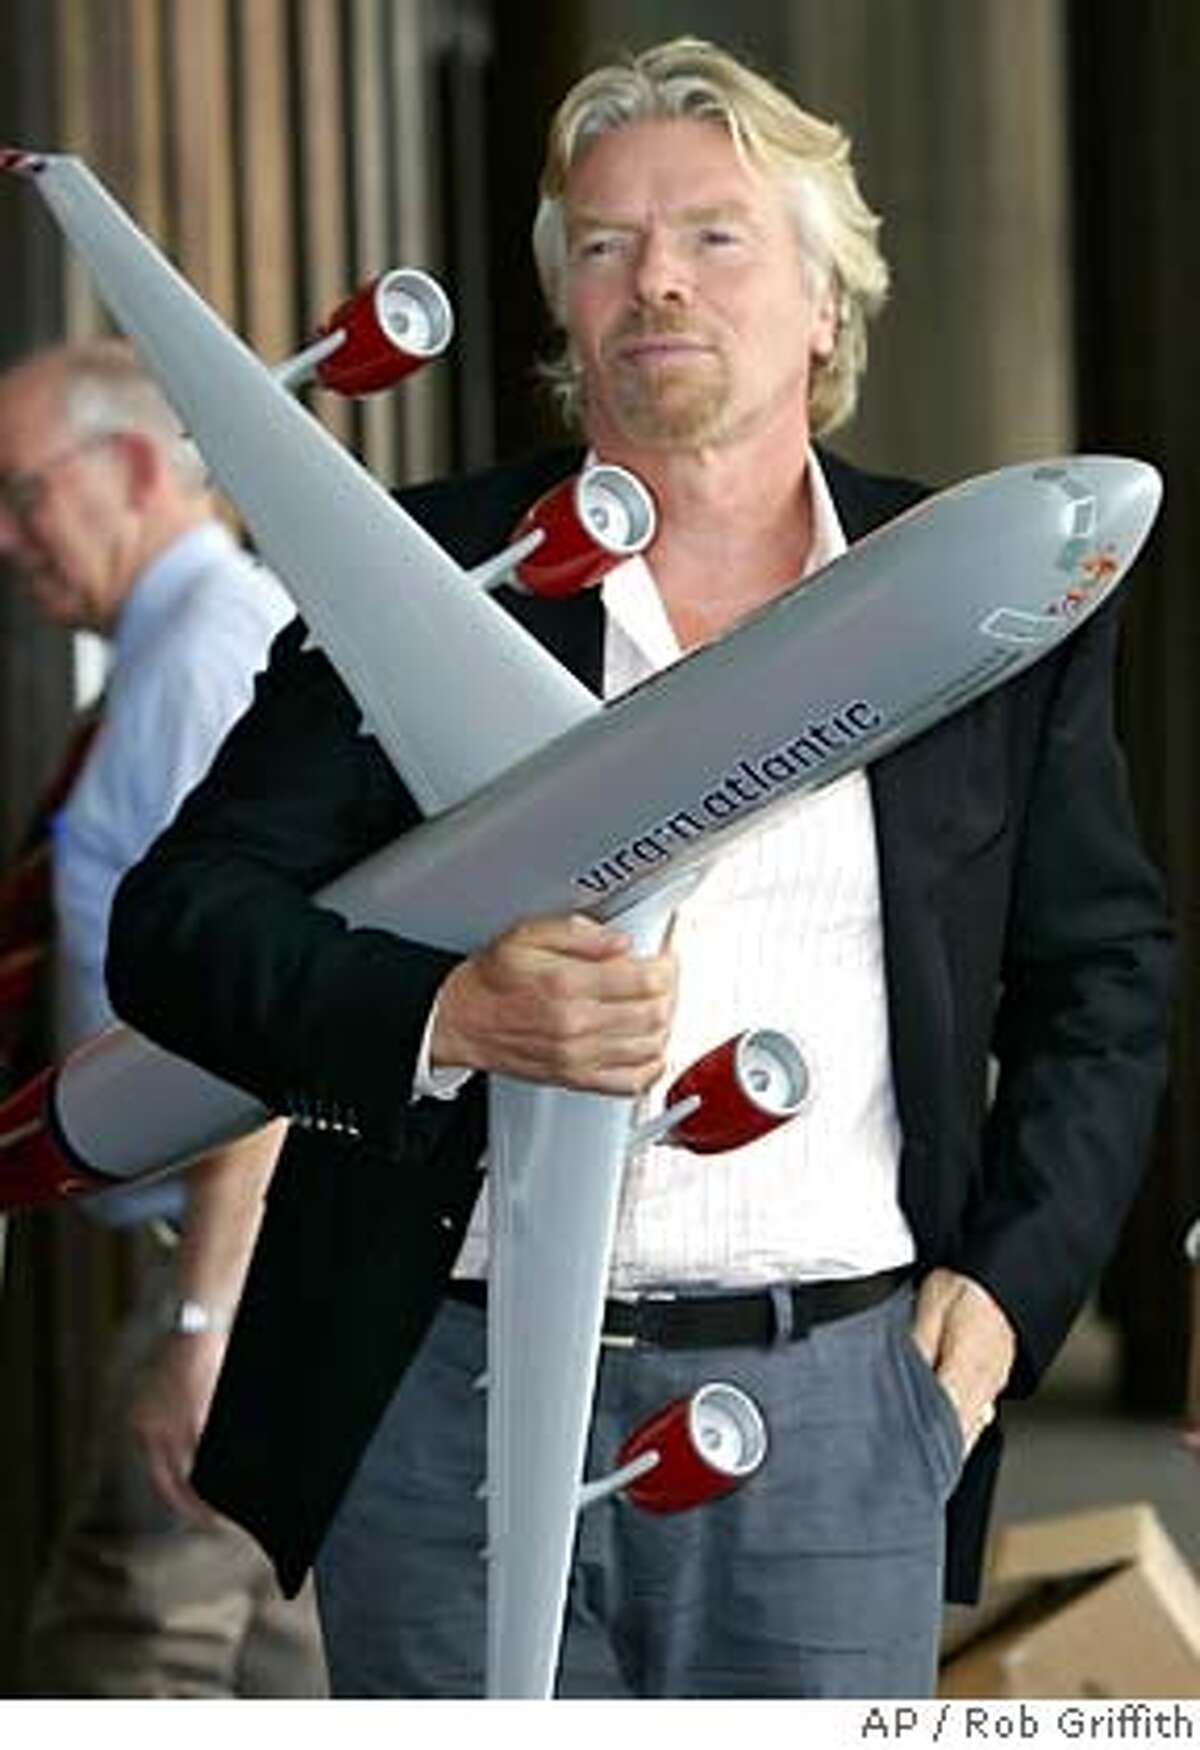 Sir Richard Branson stands outside a hotel in Sydney, Australia, Thursday, Dec. 8, 2005, holding a model Virgin Atlantic plane. Sir Branson is in Australia to celebrate the first-year anniversary of Virgin Atlantic's London-Australia route. (AP Photo/Rob Griffith) Ran on: 12-09-2005 Richard Branson, part owner of the proposed Virgin America airline, says the low-cost carrier should begin flying out of SFO next year.